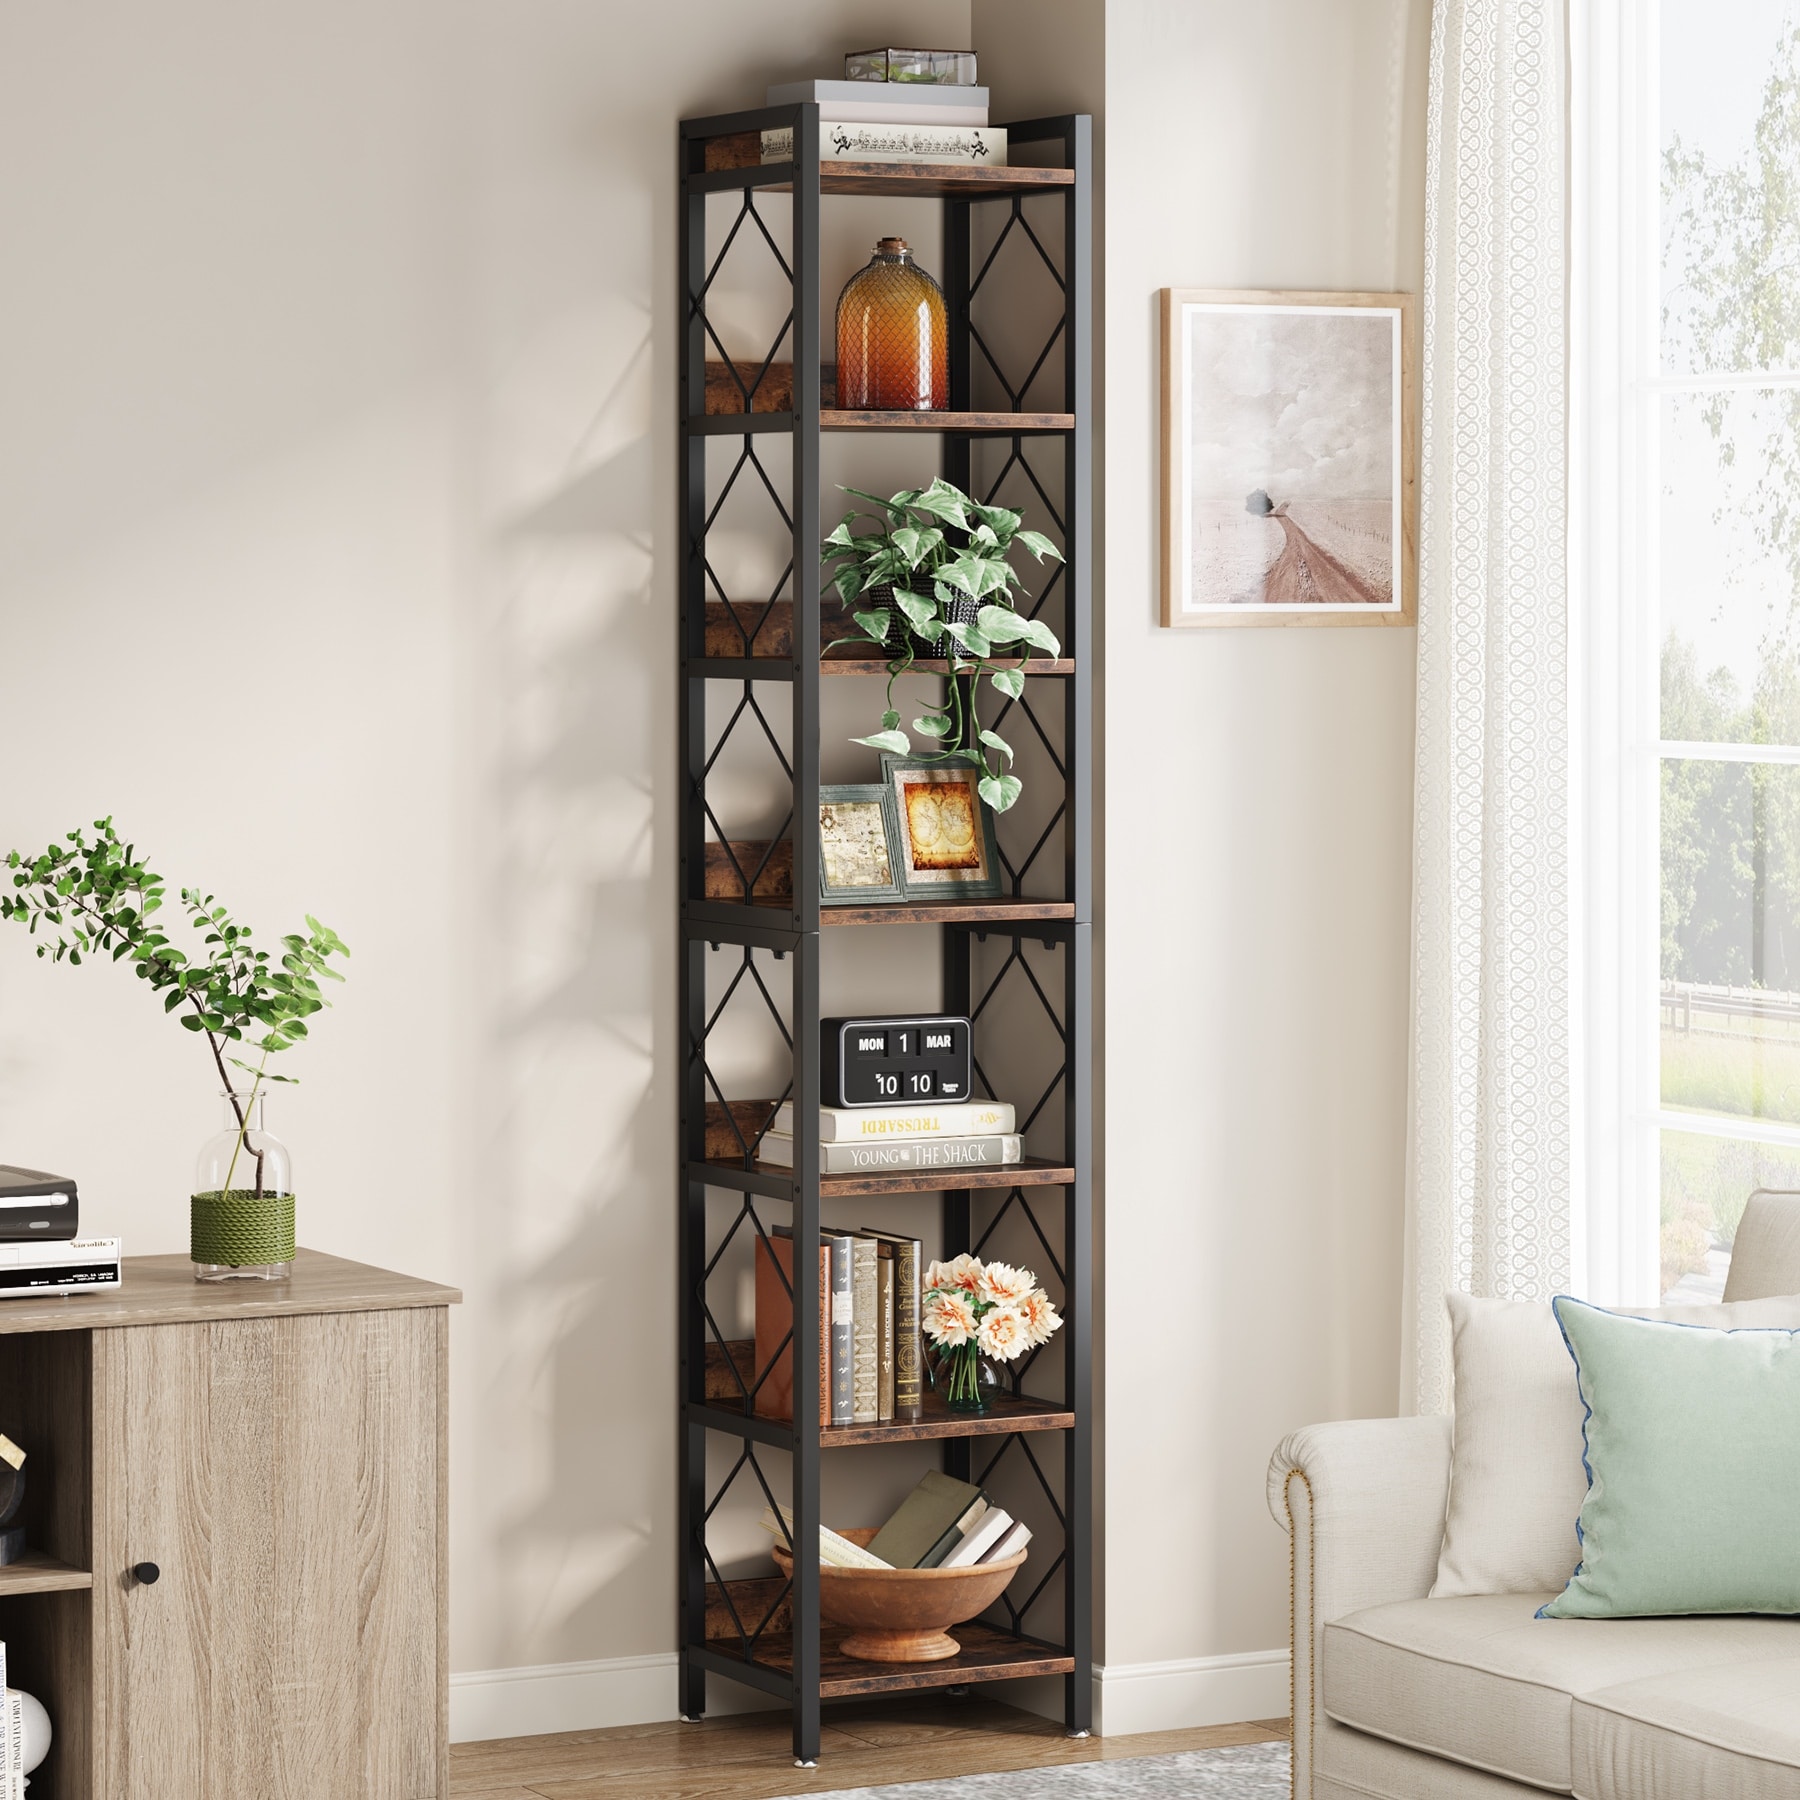 https://ak1.ostkcdn.com/images/products/is/images/direct/c8dbb5d37d8d65d924ec8956a19b8ef04bd7f682/79-Inch-Tall-Corner-Shelf%2C-Corner-Bookcase-Rustic-Brown.jpg